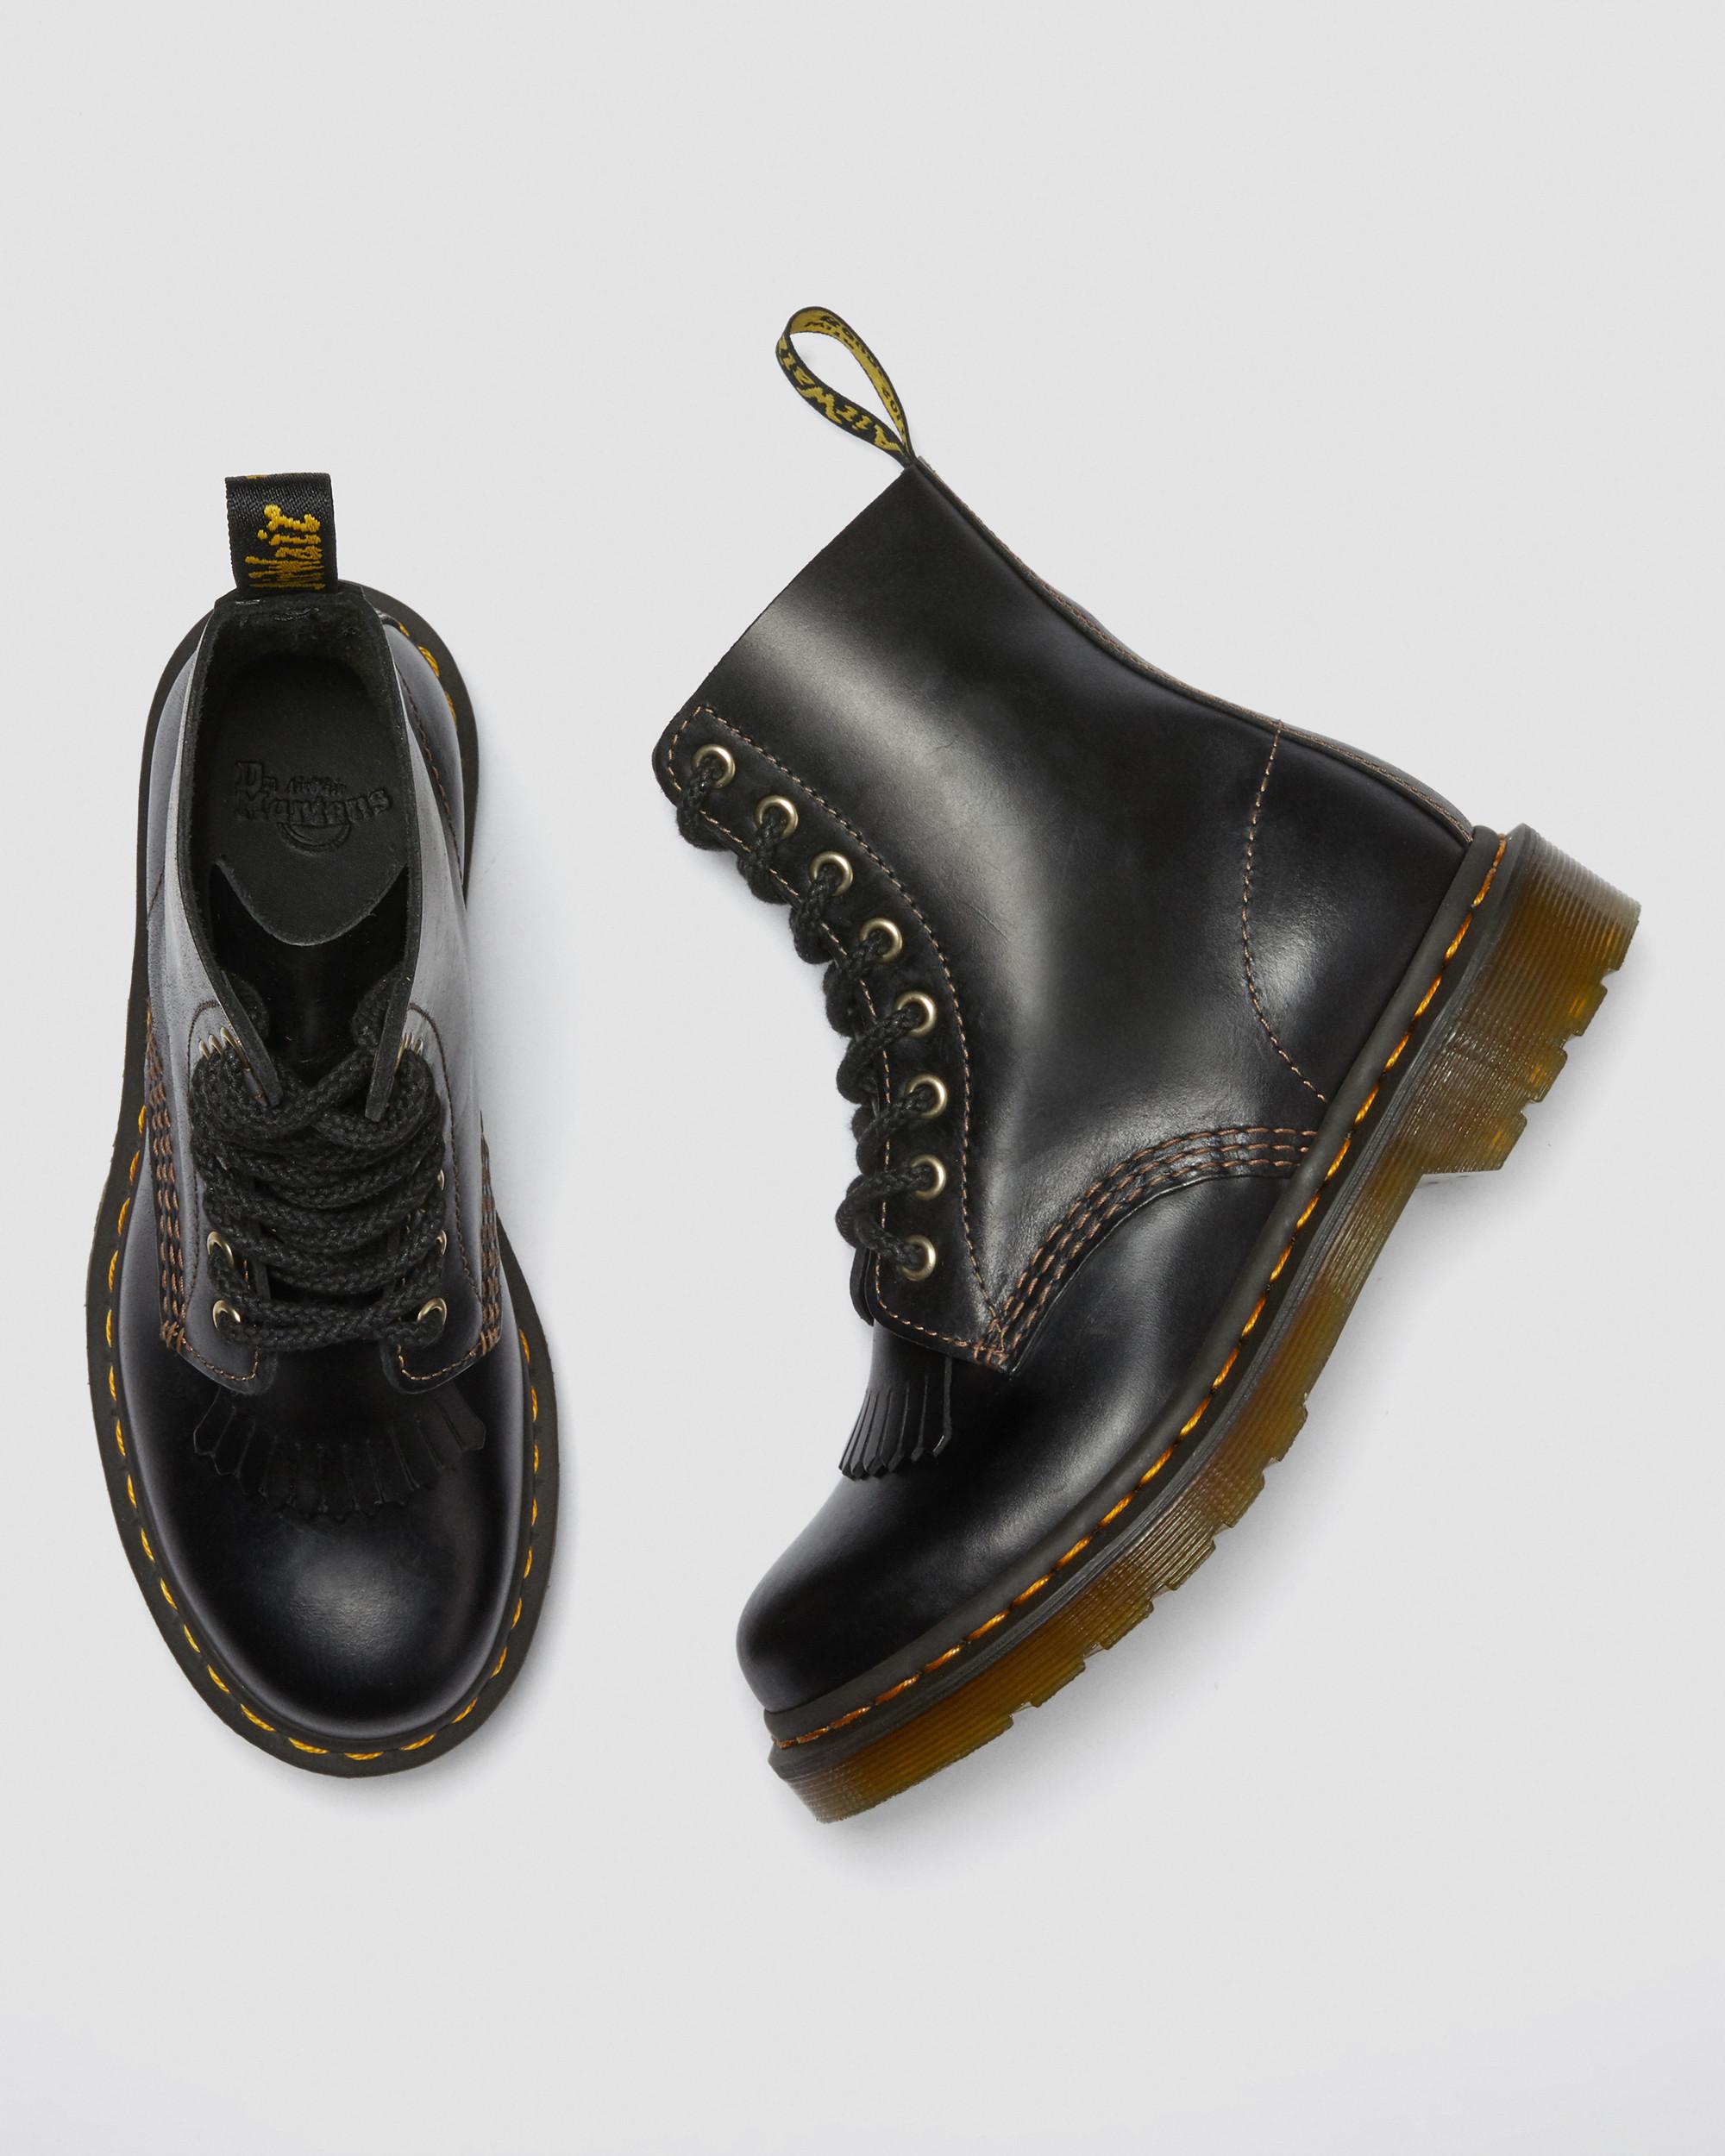 1460 Pascal Women's Abruzzo Leather Boots | Dr. Martens